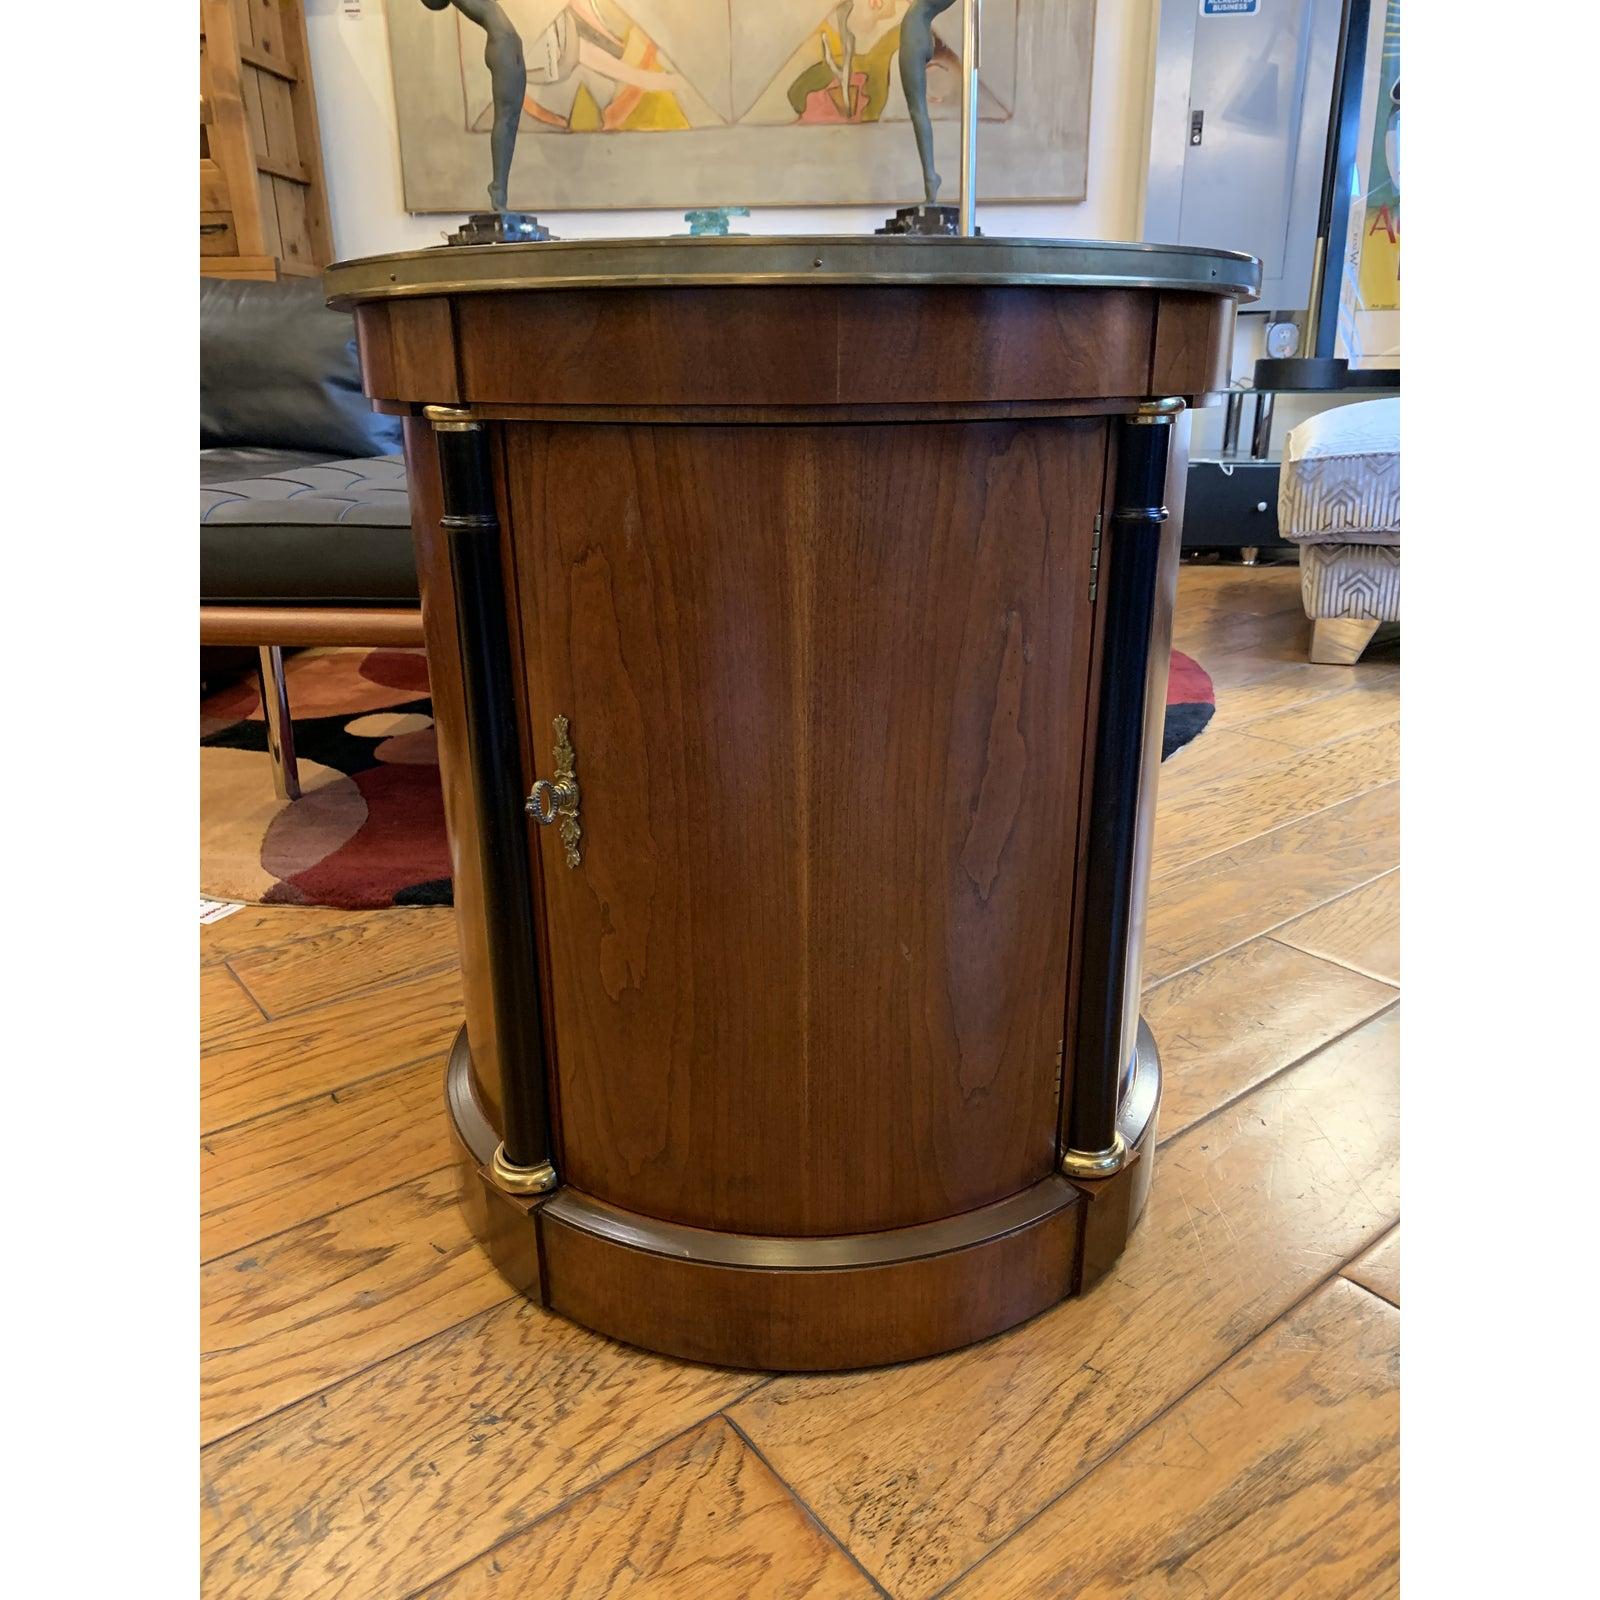 A Baker Furniture cherry Model #4359 drum side table. Starburst patterned inlay veneer is beautifully contained within circular drum form. Brass key and lock pull reveals open storage containing optional shelf. Top perimeter is banded in brushed